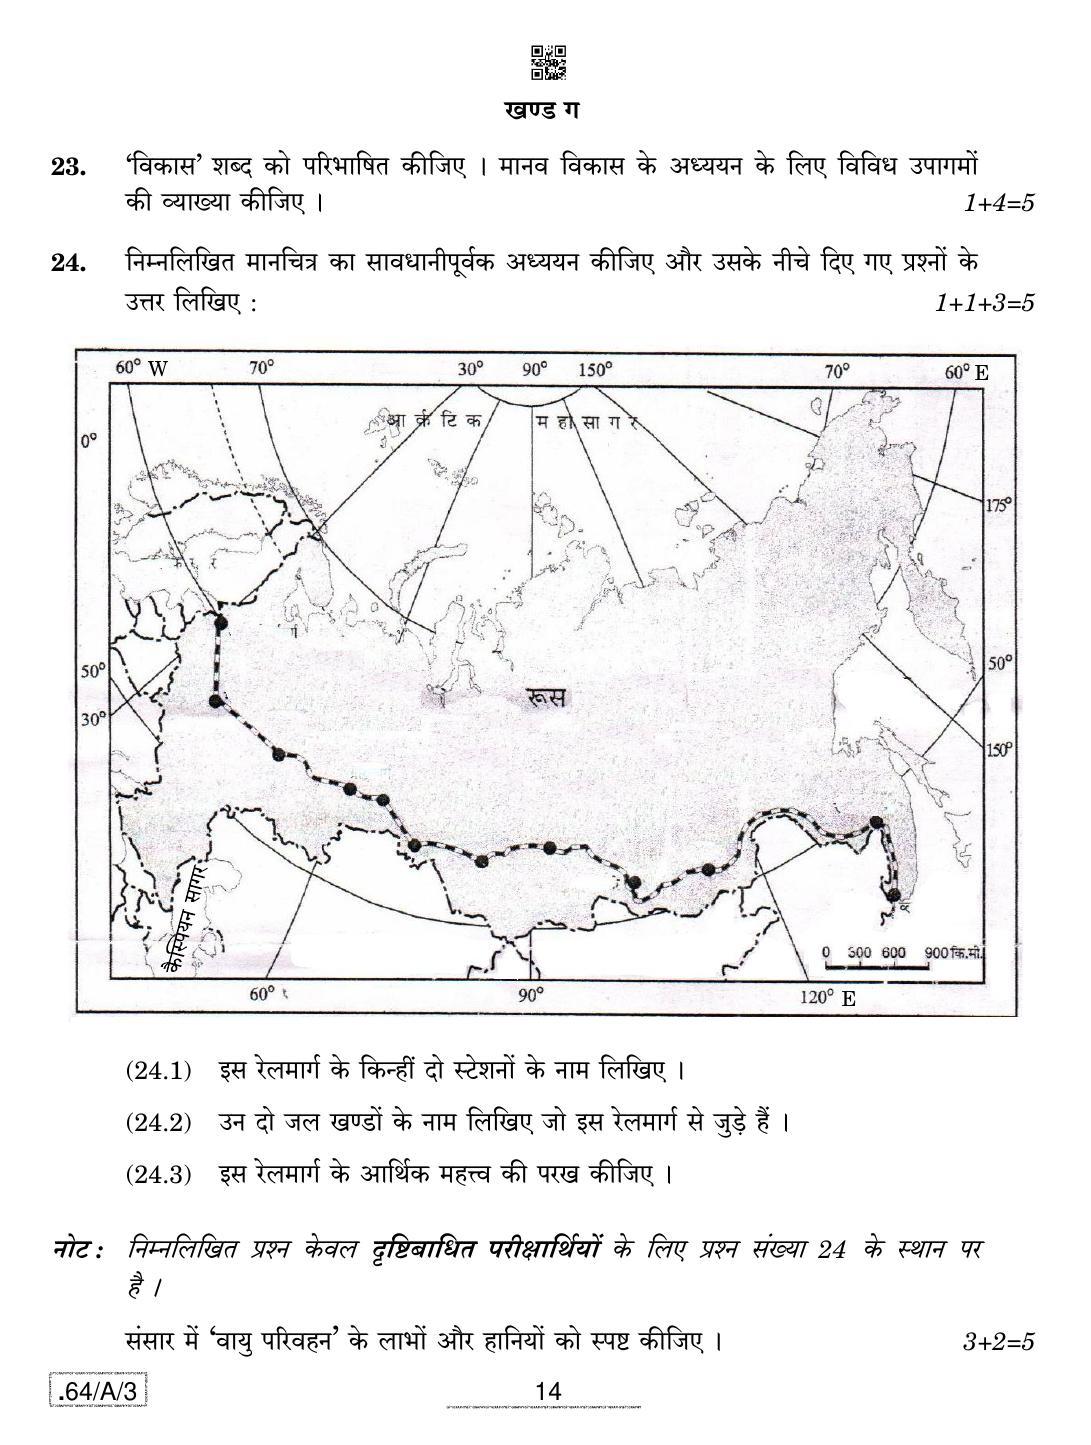 CBSE Class 12 64-C-3 - Geography 2020 Compartment Question Paper - Page 14